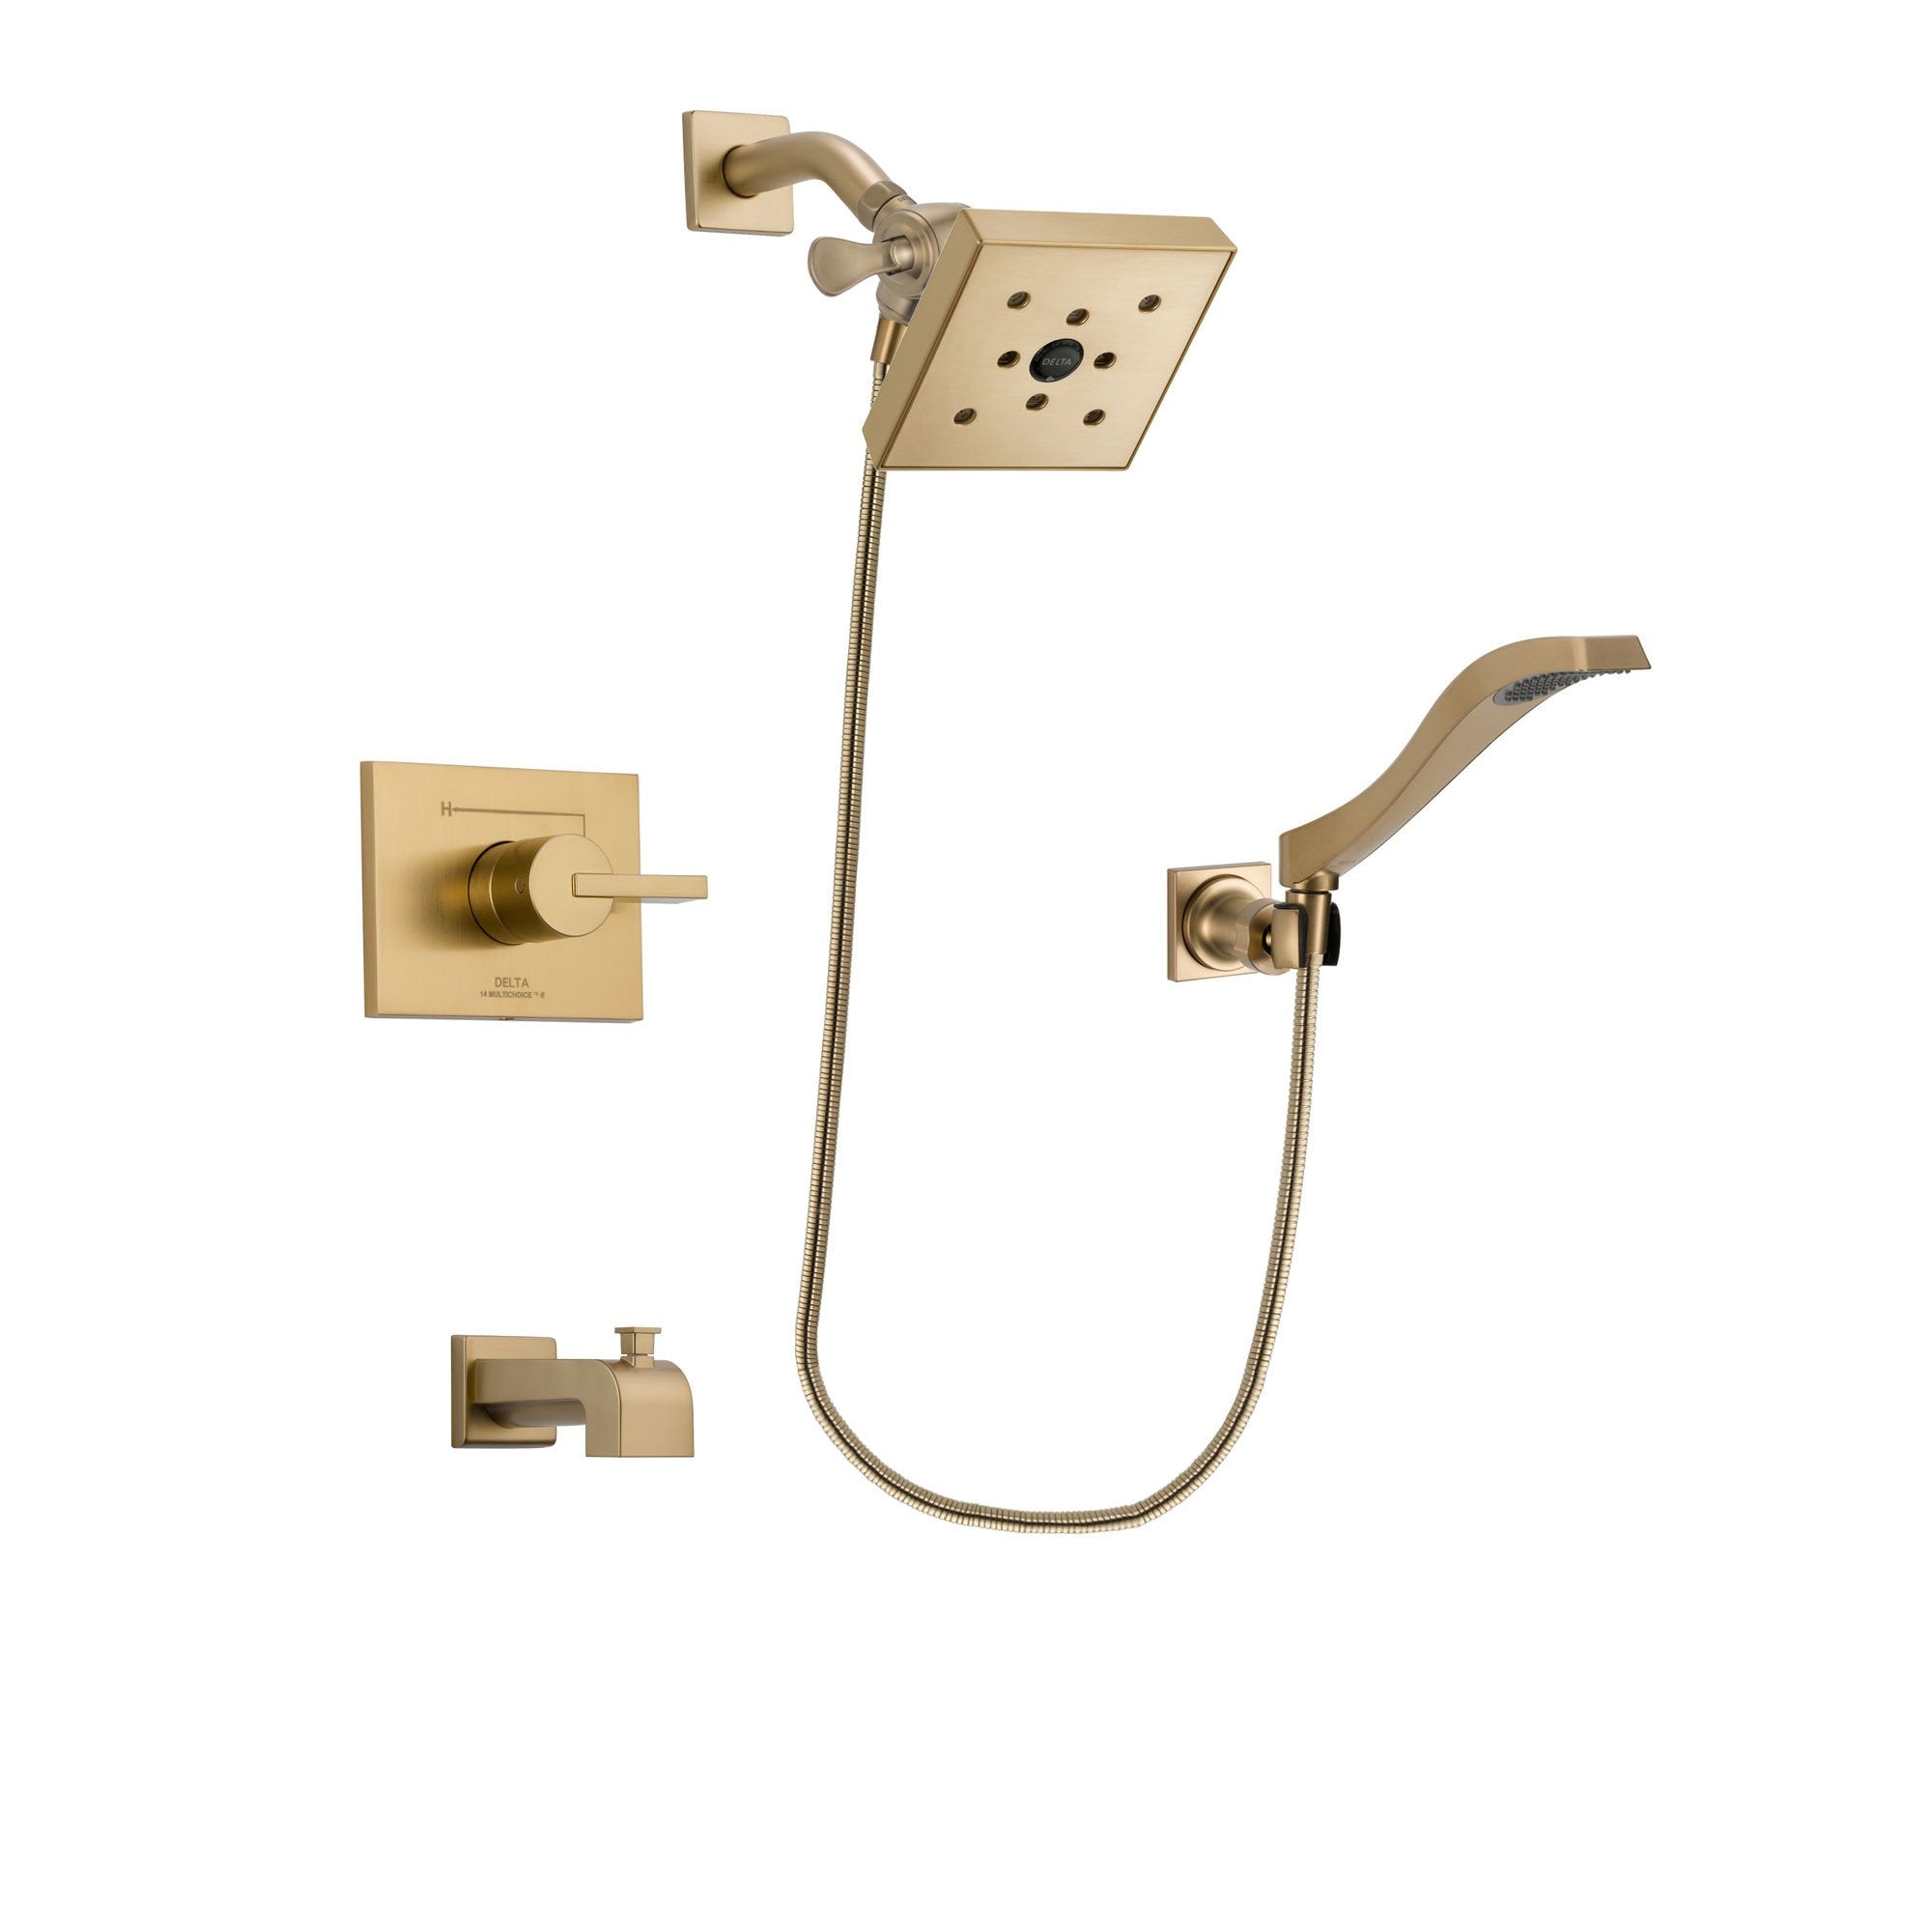 Delta Vero Champagne Bronze Finish Tub and Shower Faucet System Package with Square Shower Head and Modern Wall Mount Handheld Shower Spray Includes Rough-in Valve and Tub Spout DSP3867V